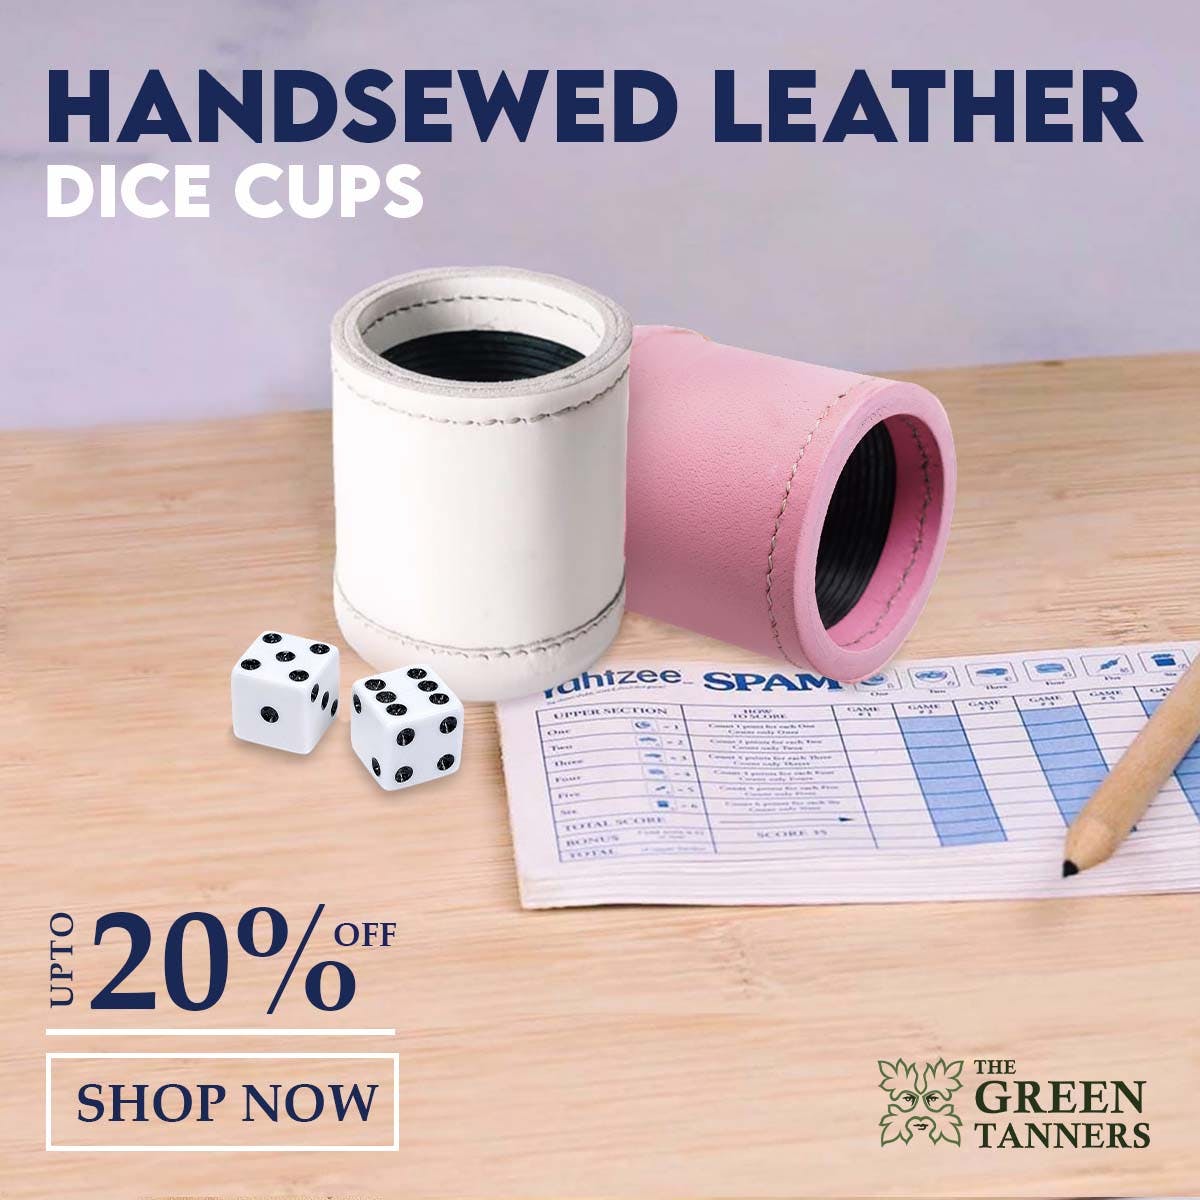 Leather Dice Cups with Ribbed Interior media 1